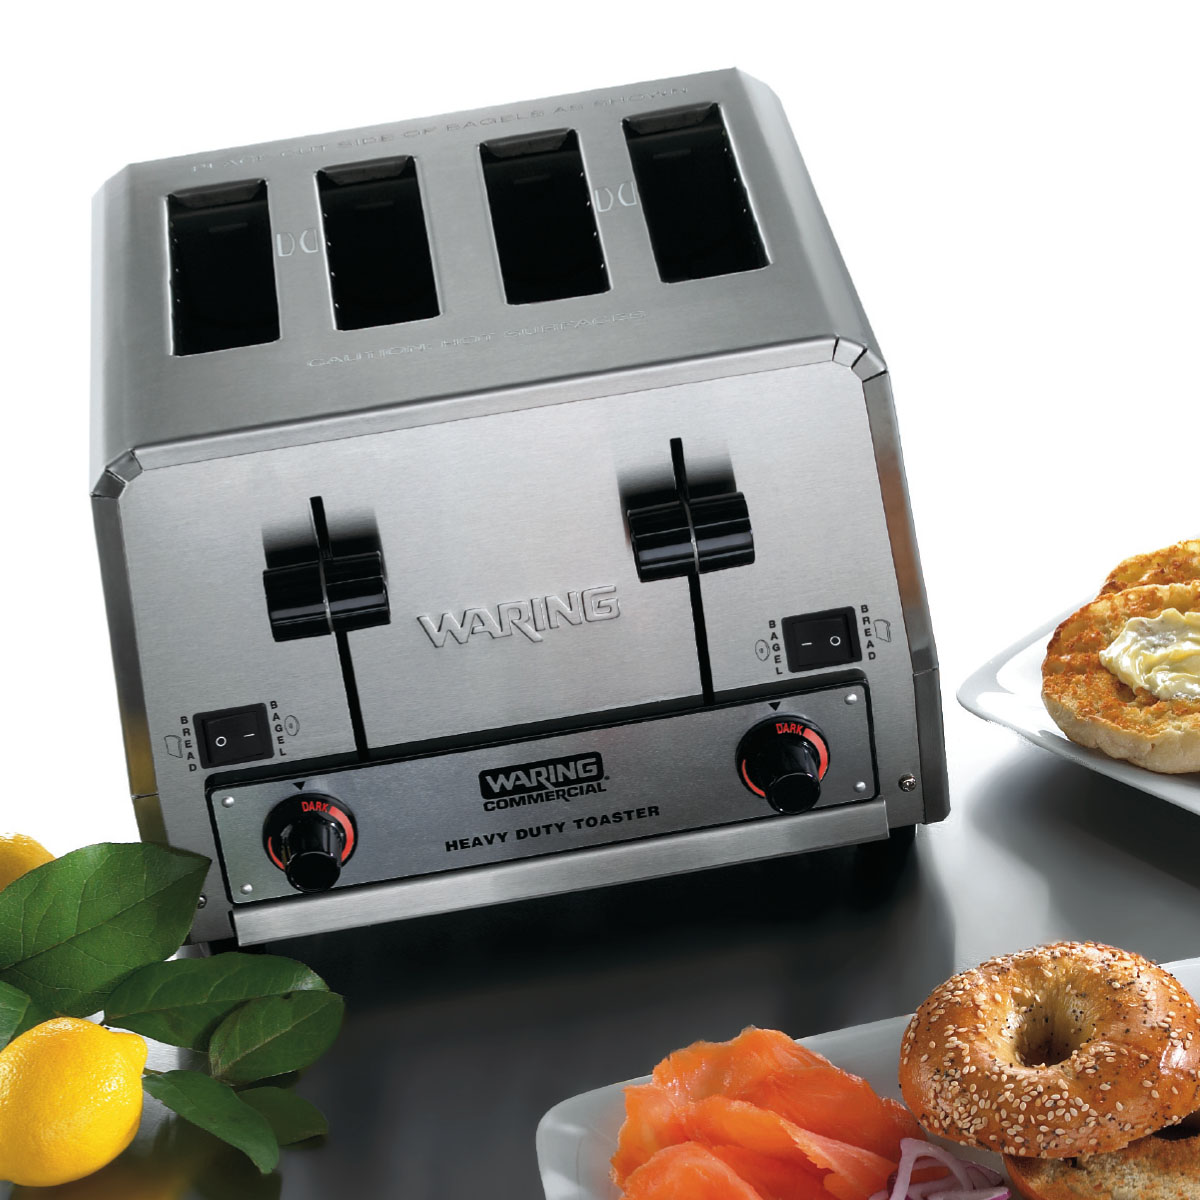 https://www.waringcommercialproducts.com/files/products/wct850rc-waring-toaster-inset3.jpg